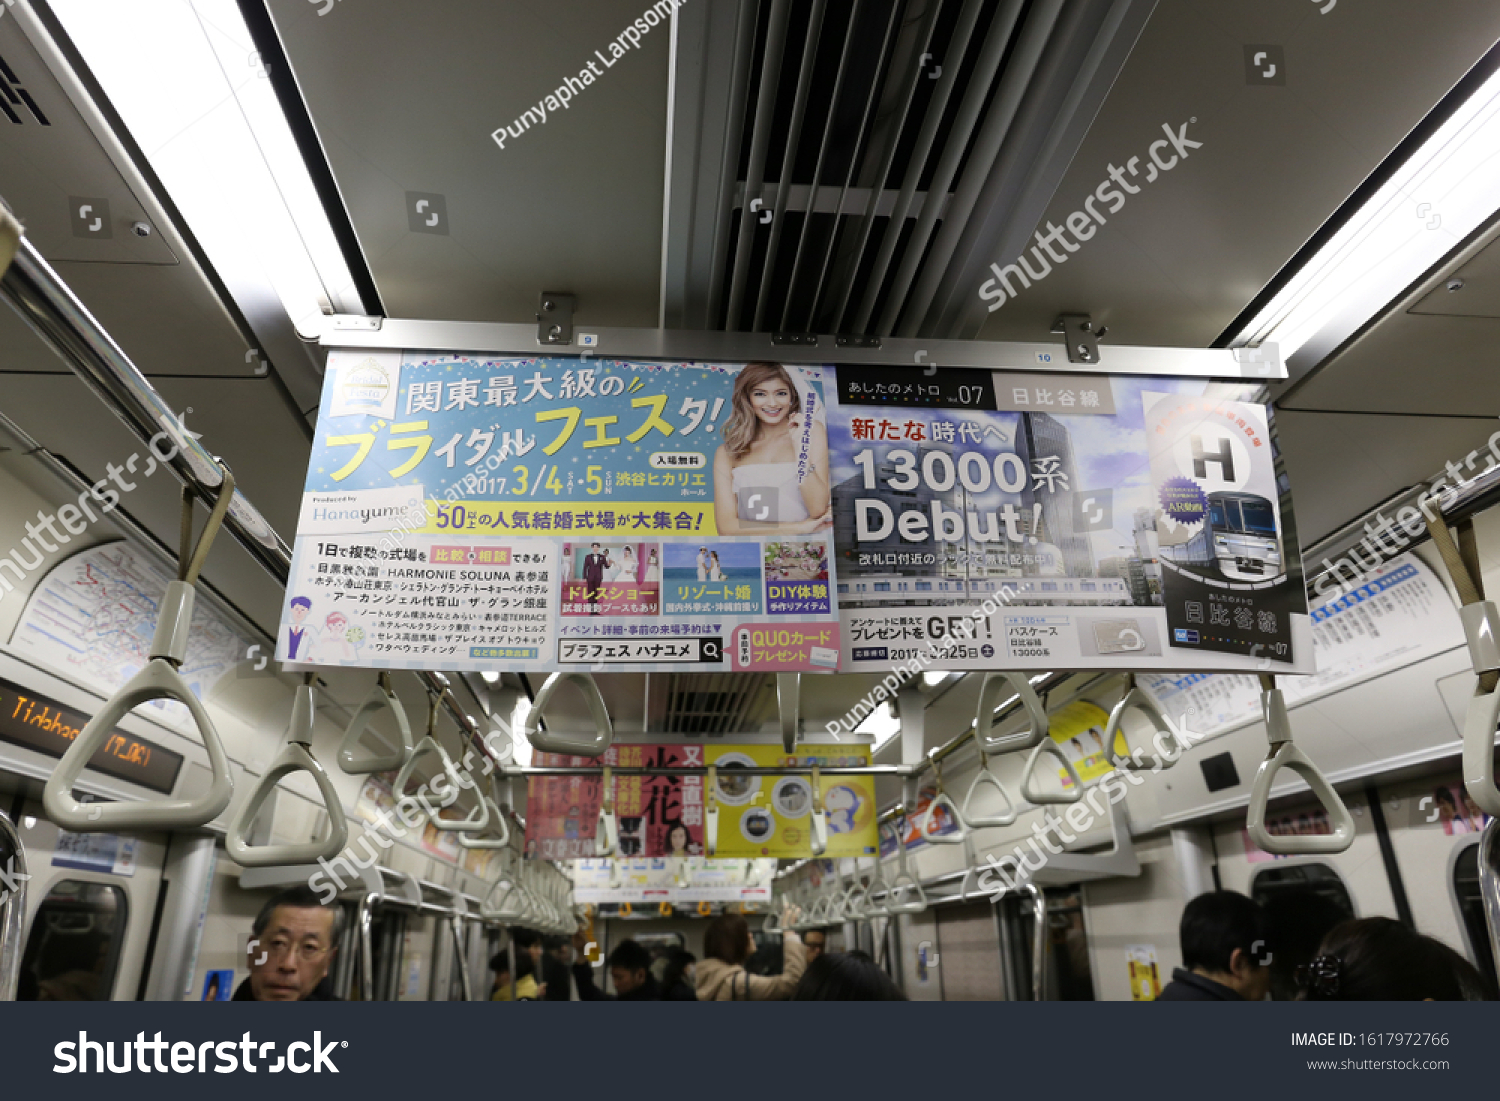 Tokyo Japan February 13 There Advertising Transportation Stock Image 1617972766